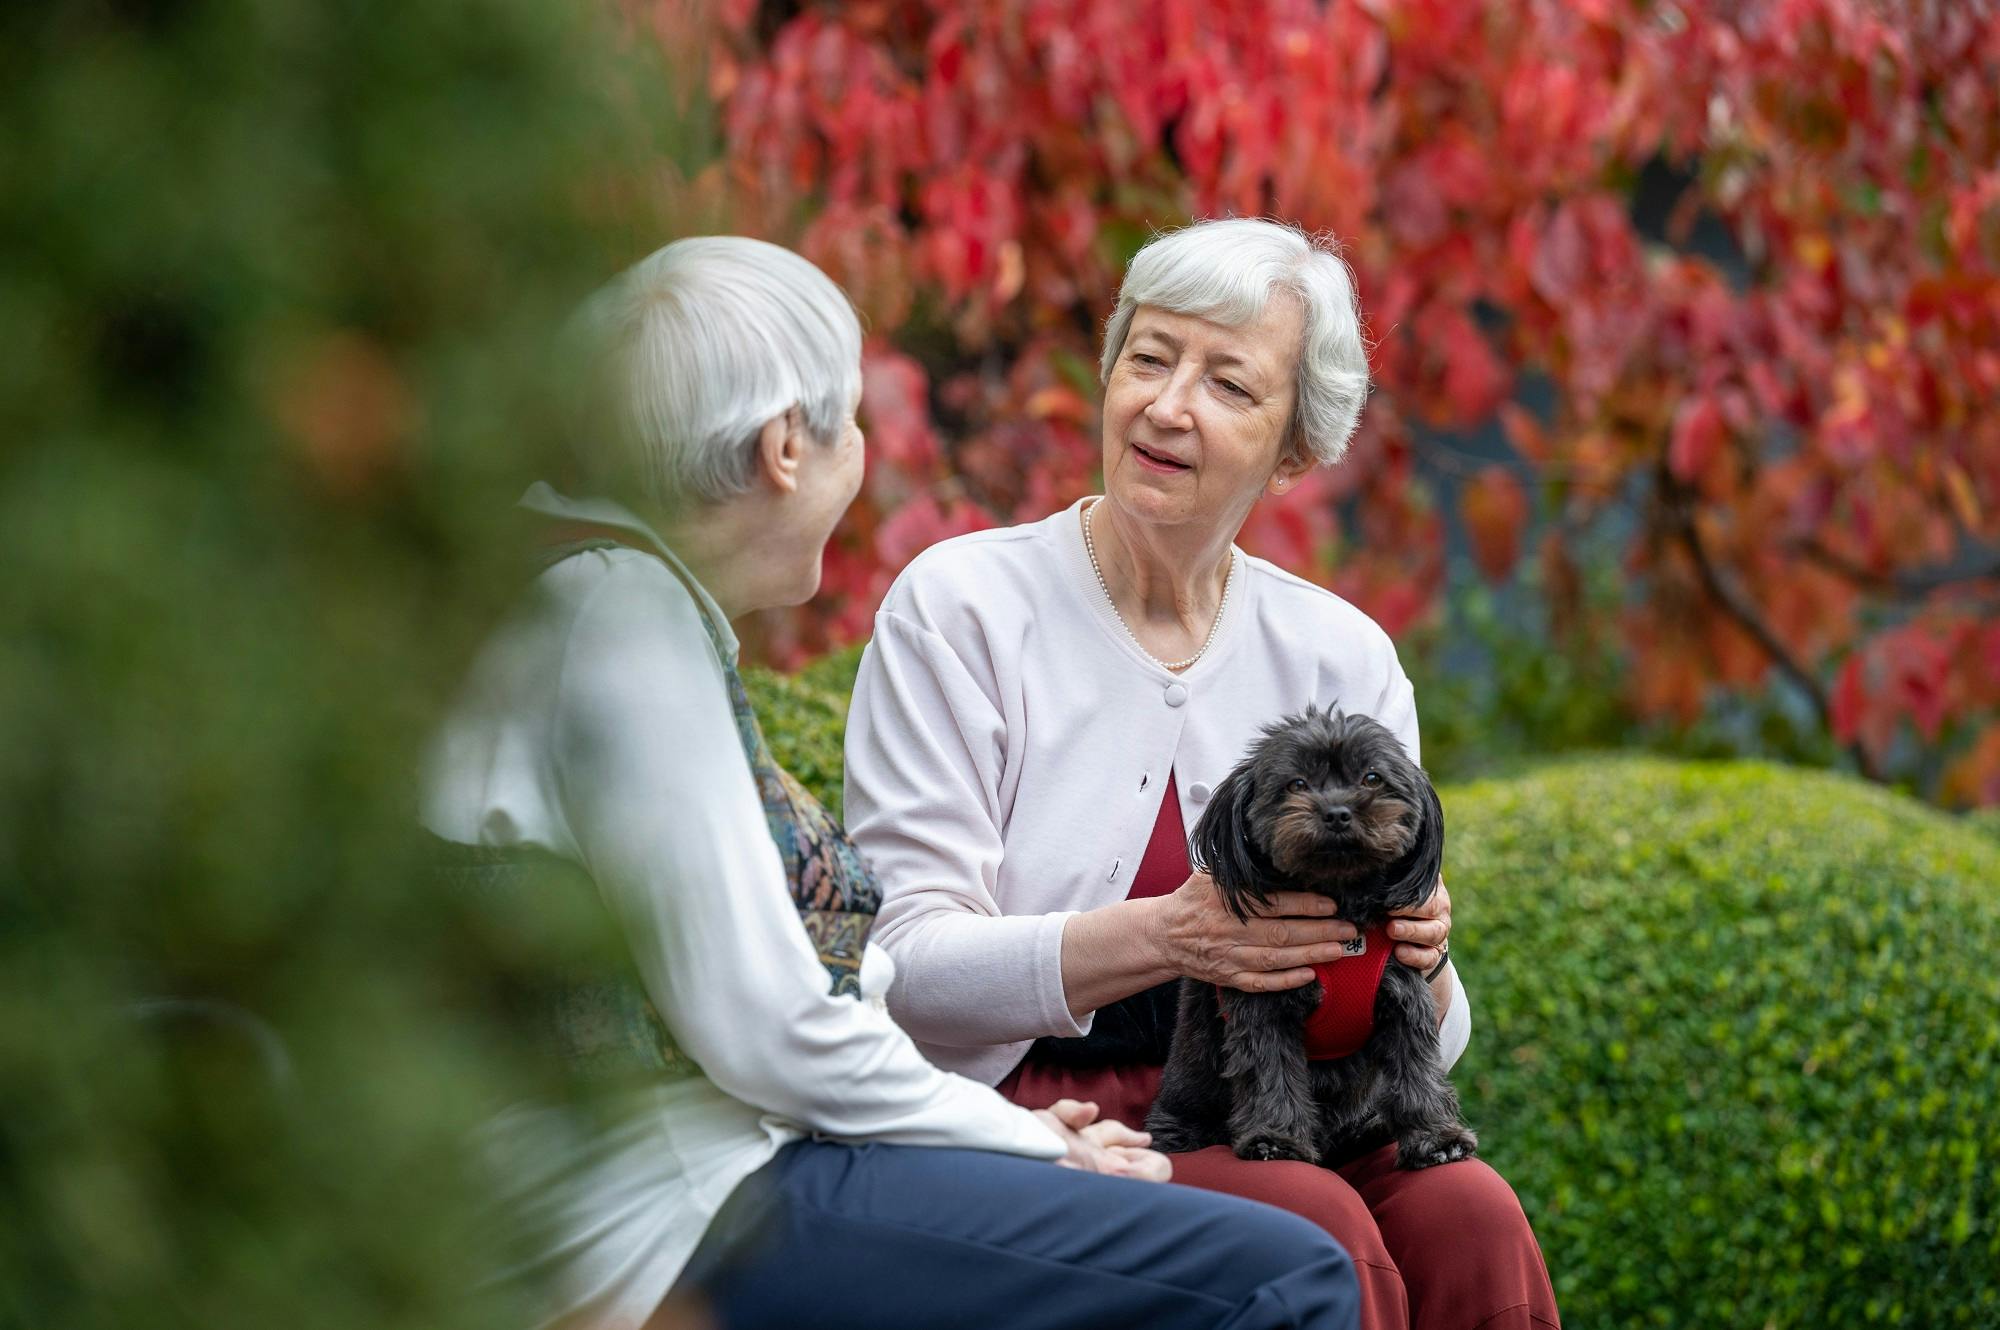 Two elderly ladies in conversation outdoors with a small dog on their laps against a background of autumn leaves.